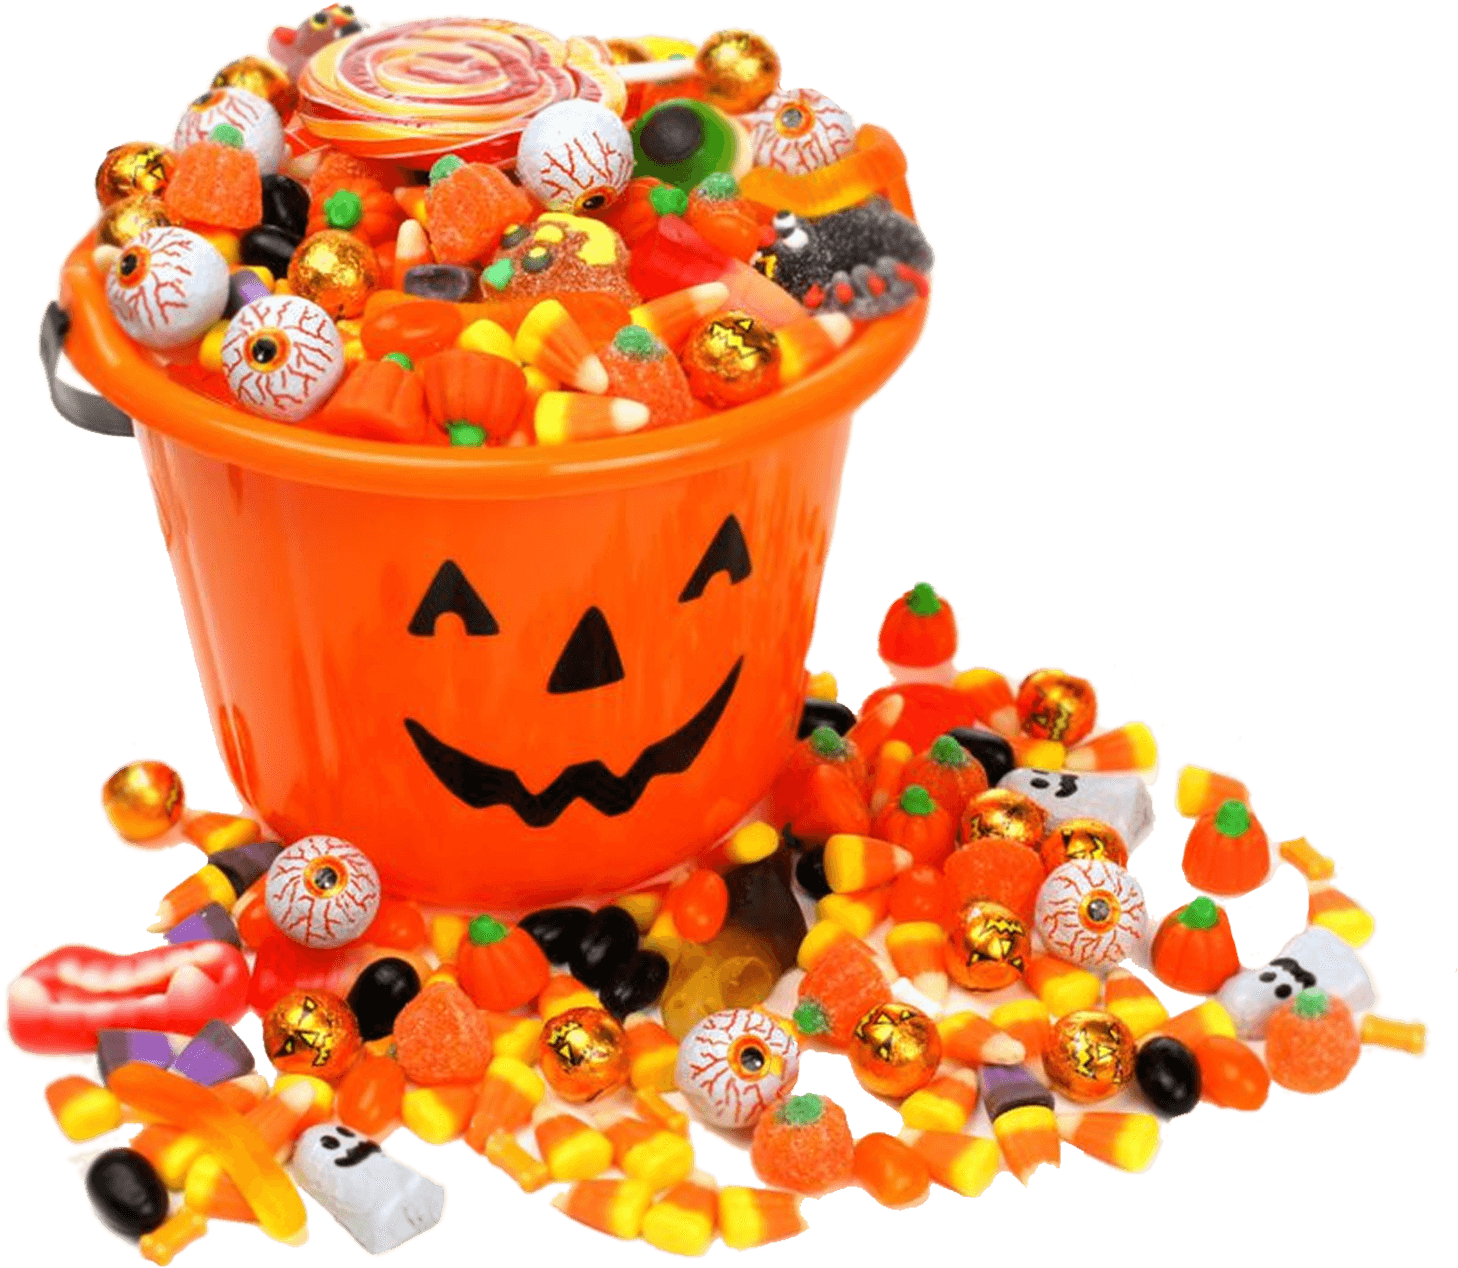 Halloween Candy gratis PNG HQ immagine